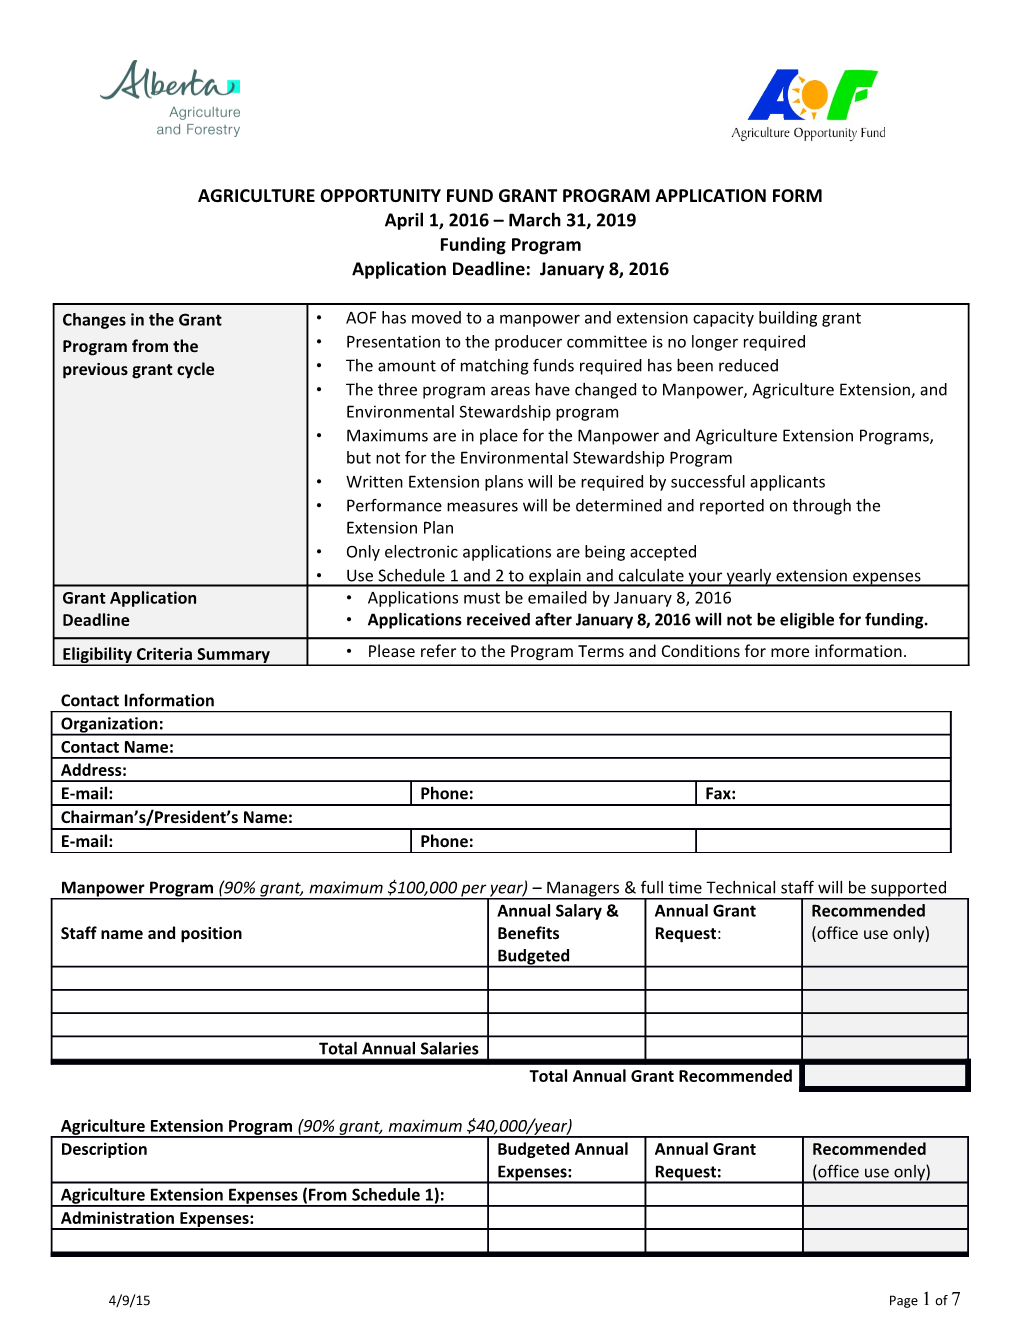 Agriculture Opportunity Fund Grant Program Application Form